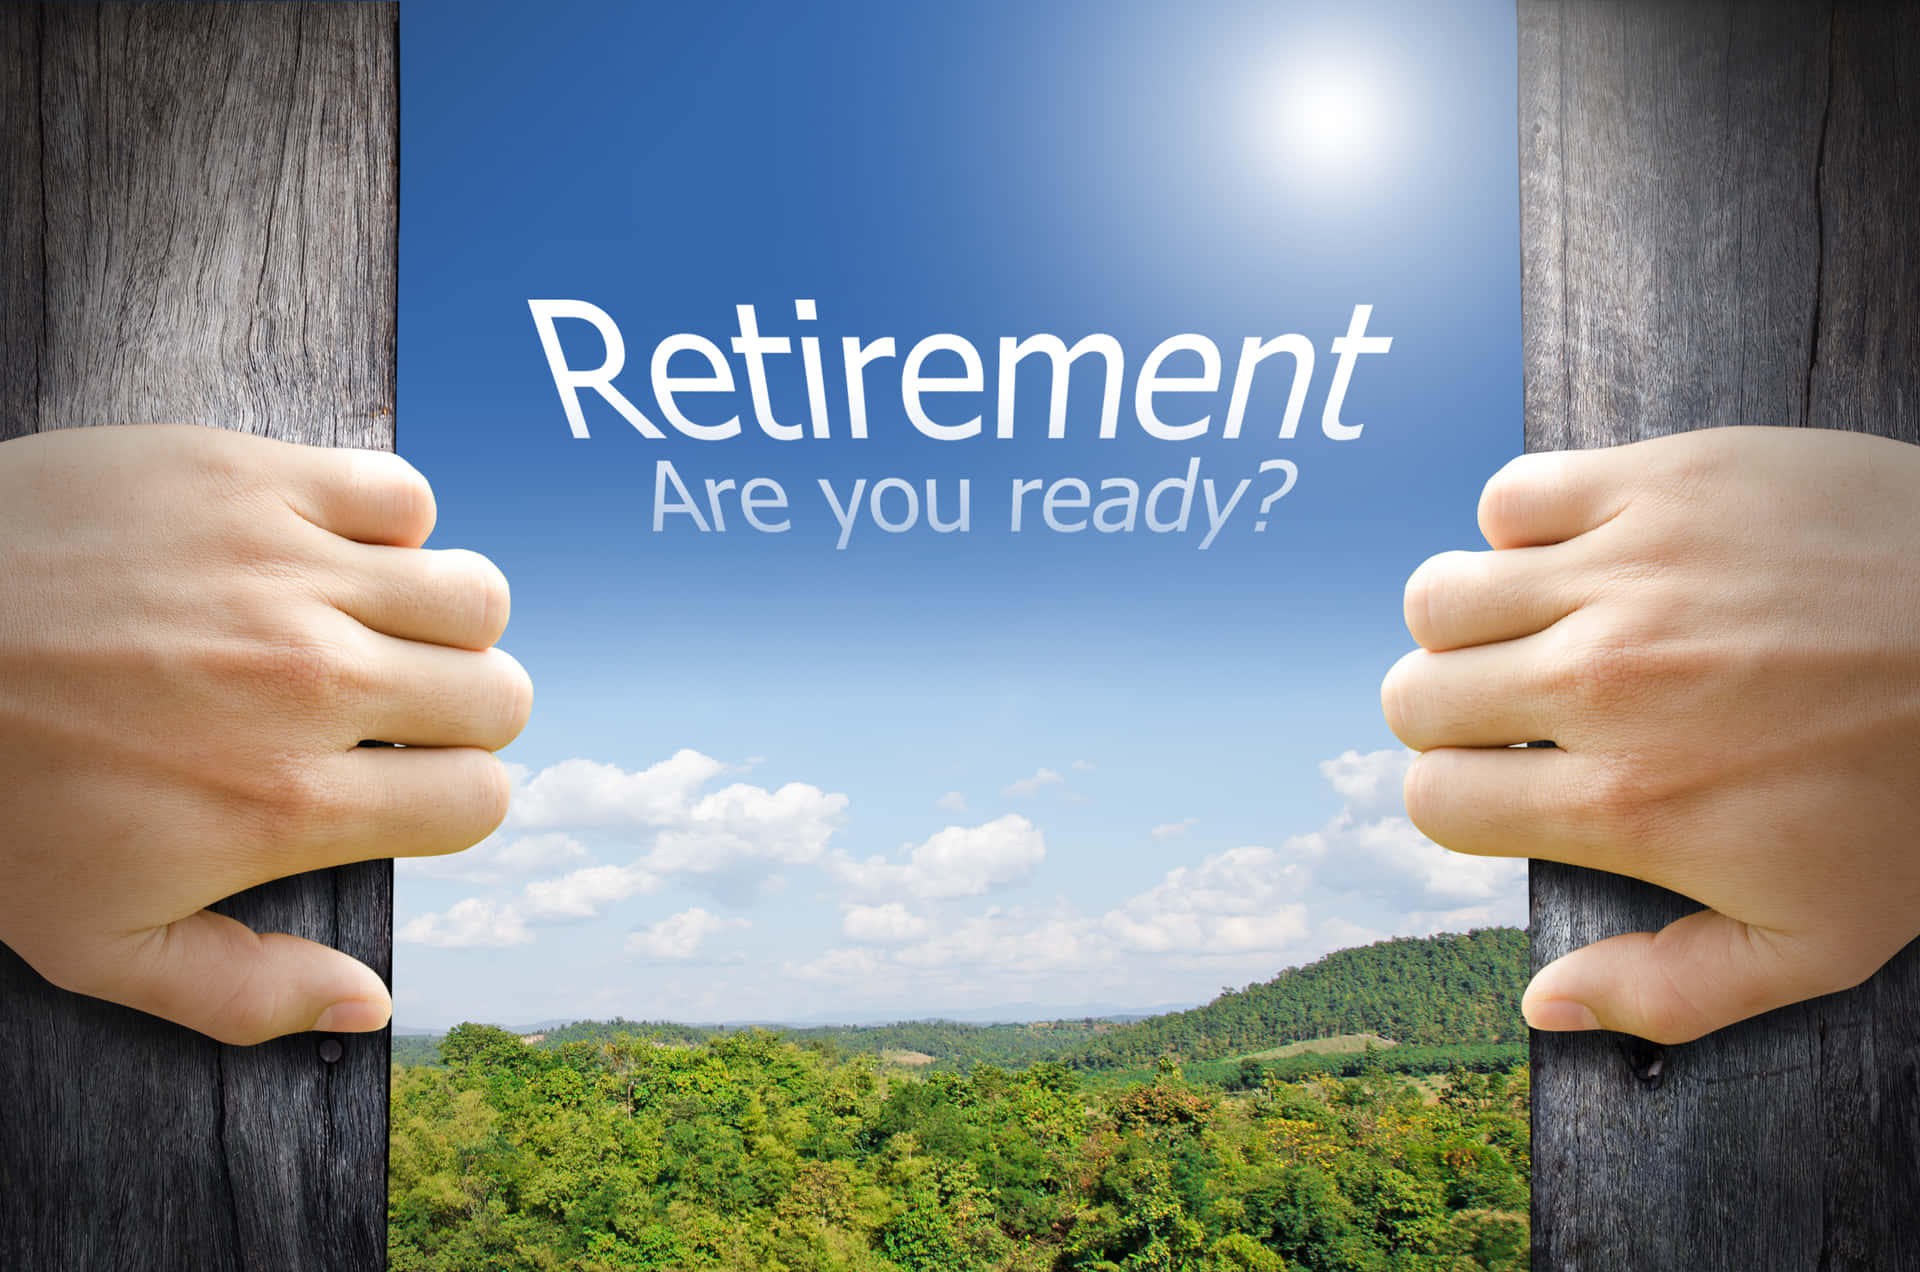 Retirement Are You Ready?